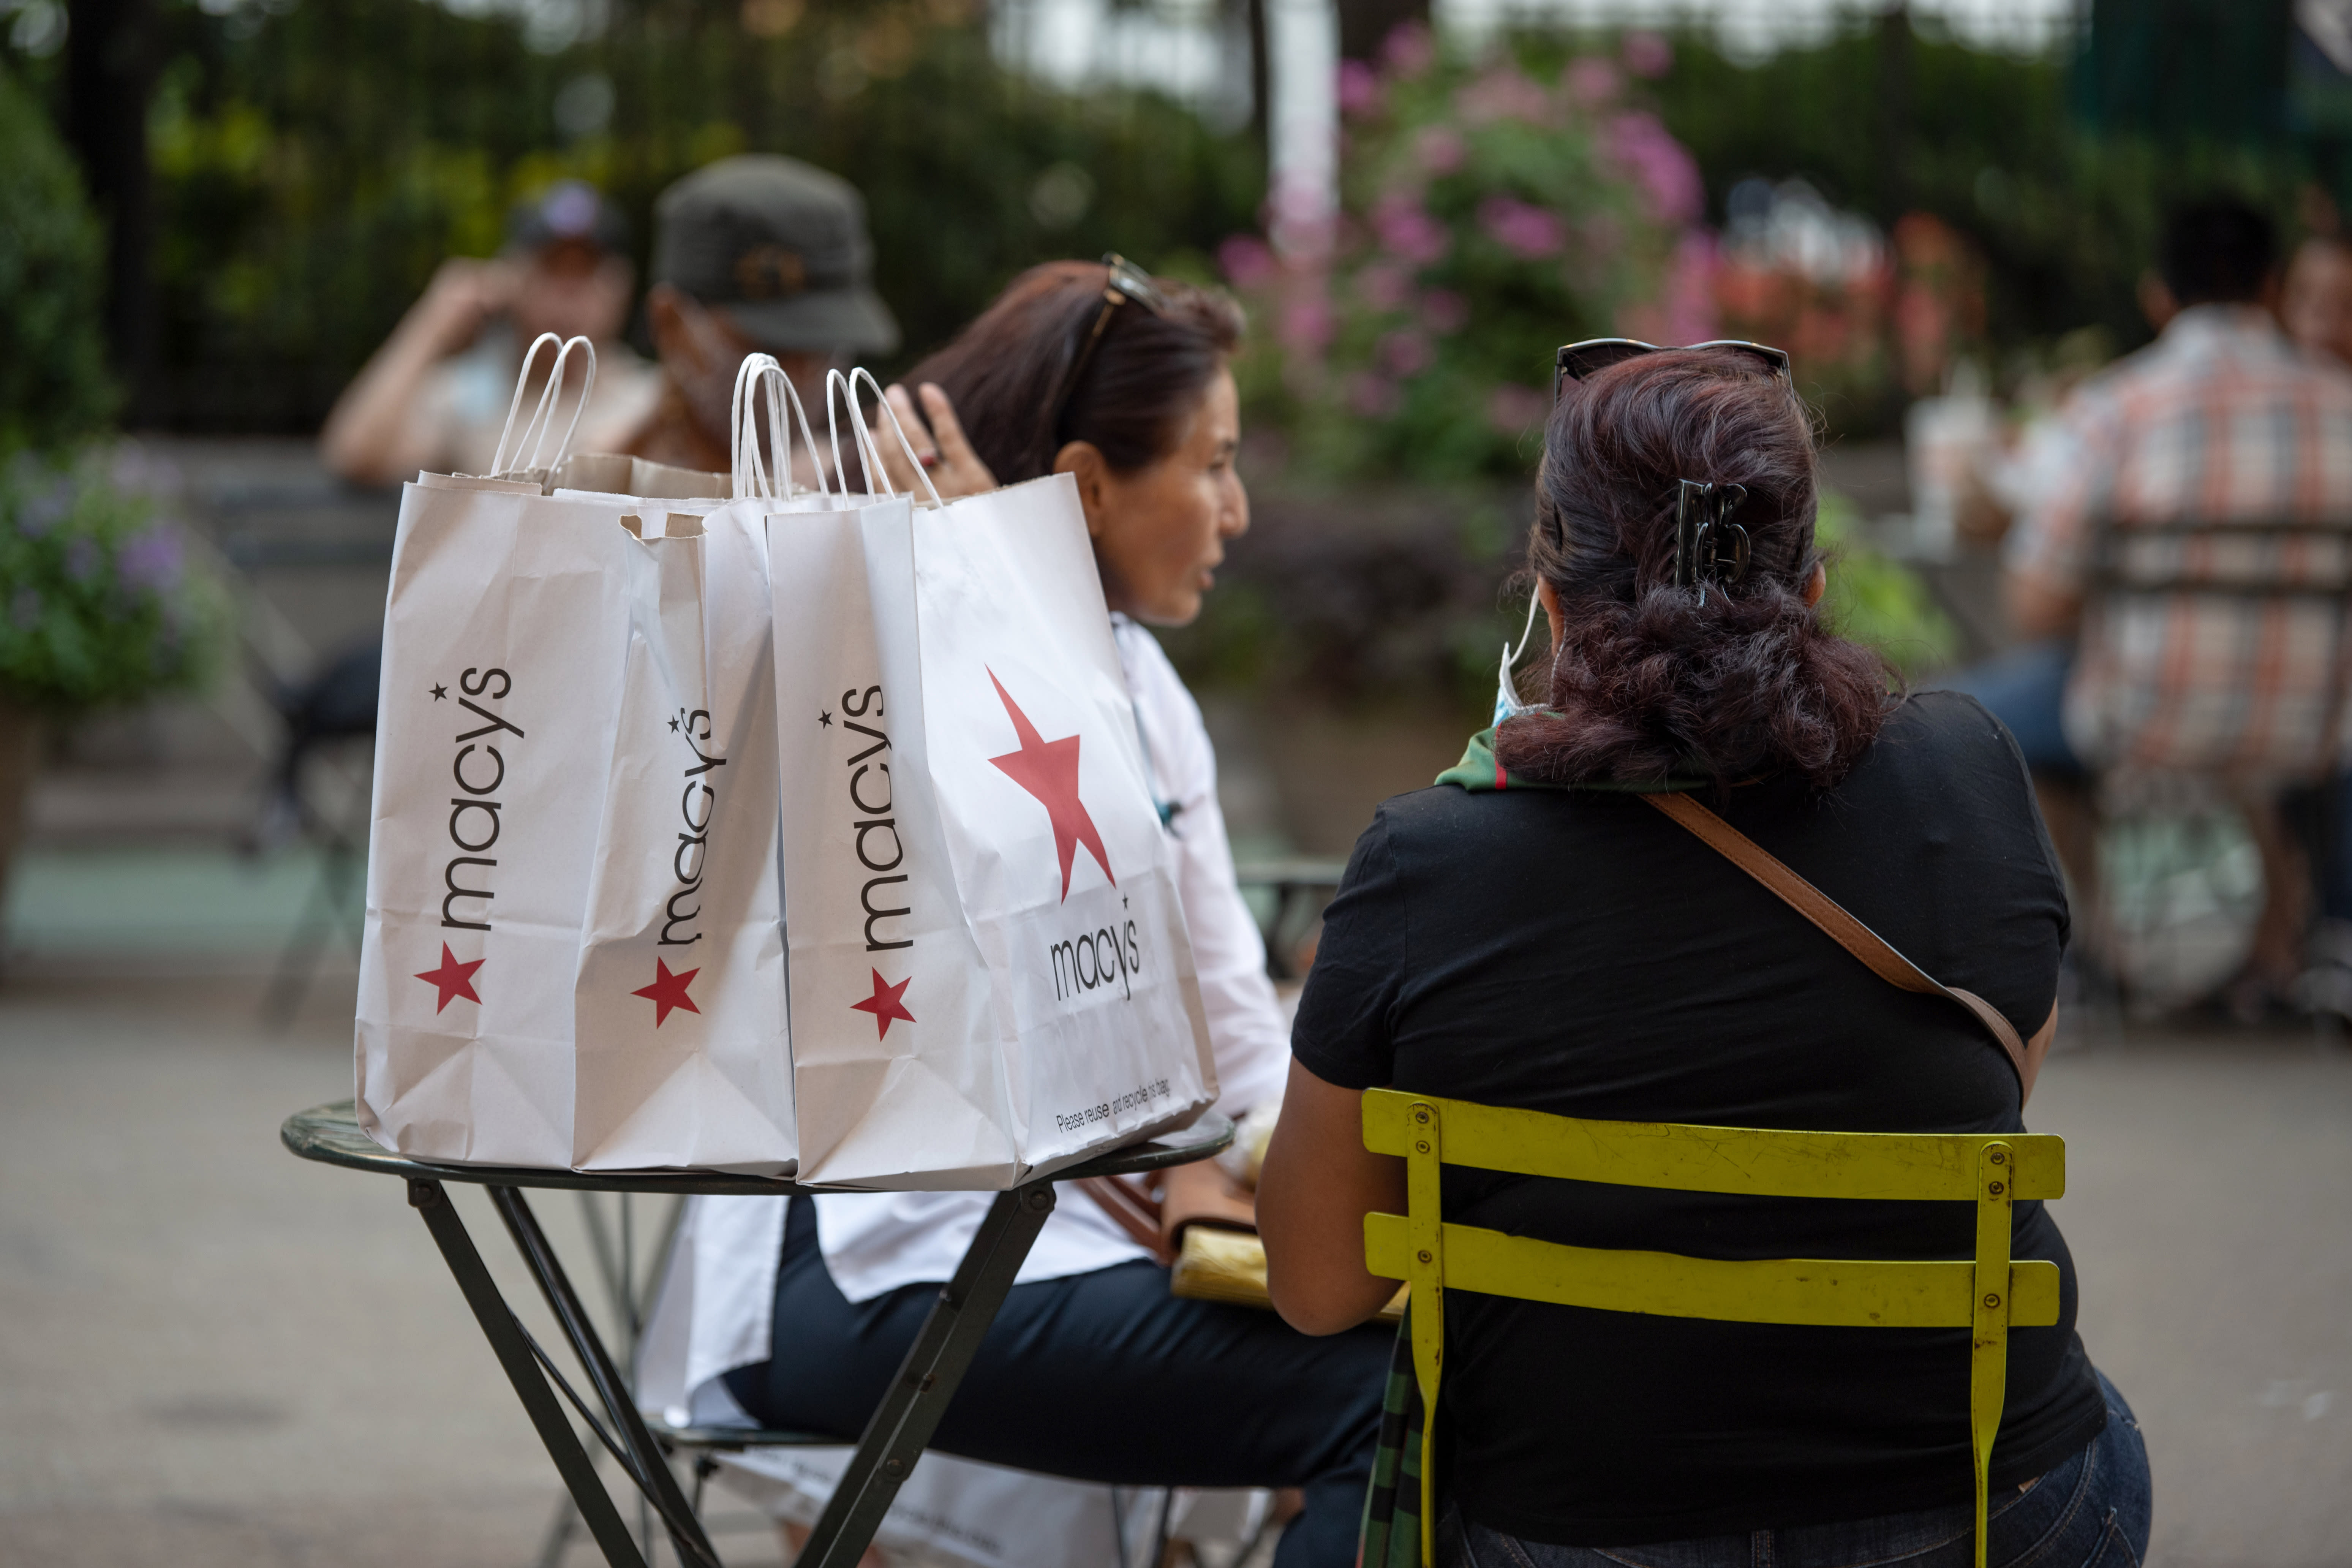 Macy's may temporarily close more stores as Covid cases rise, CEO says